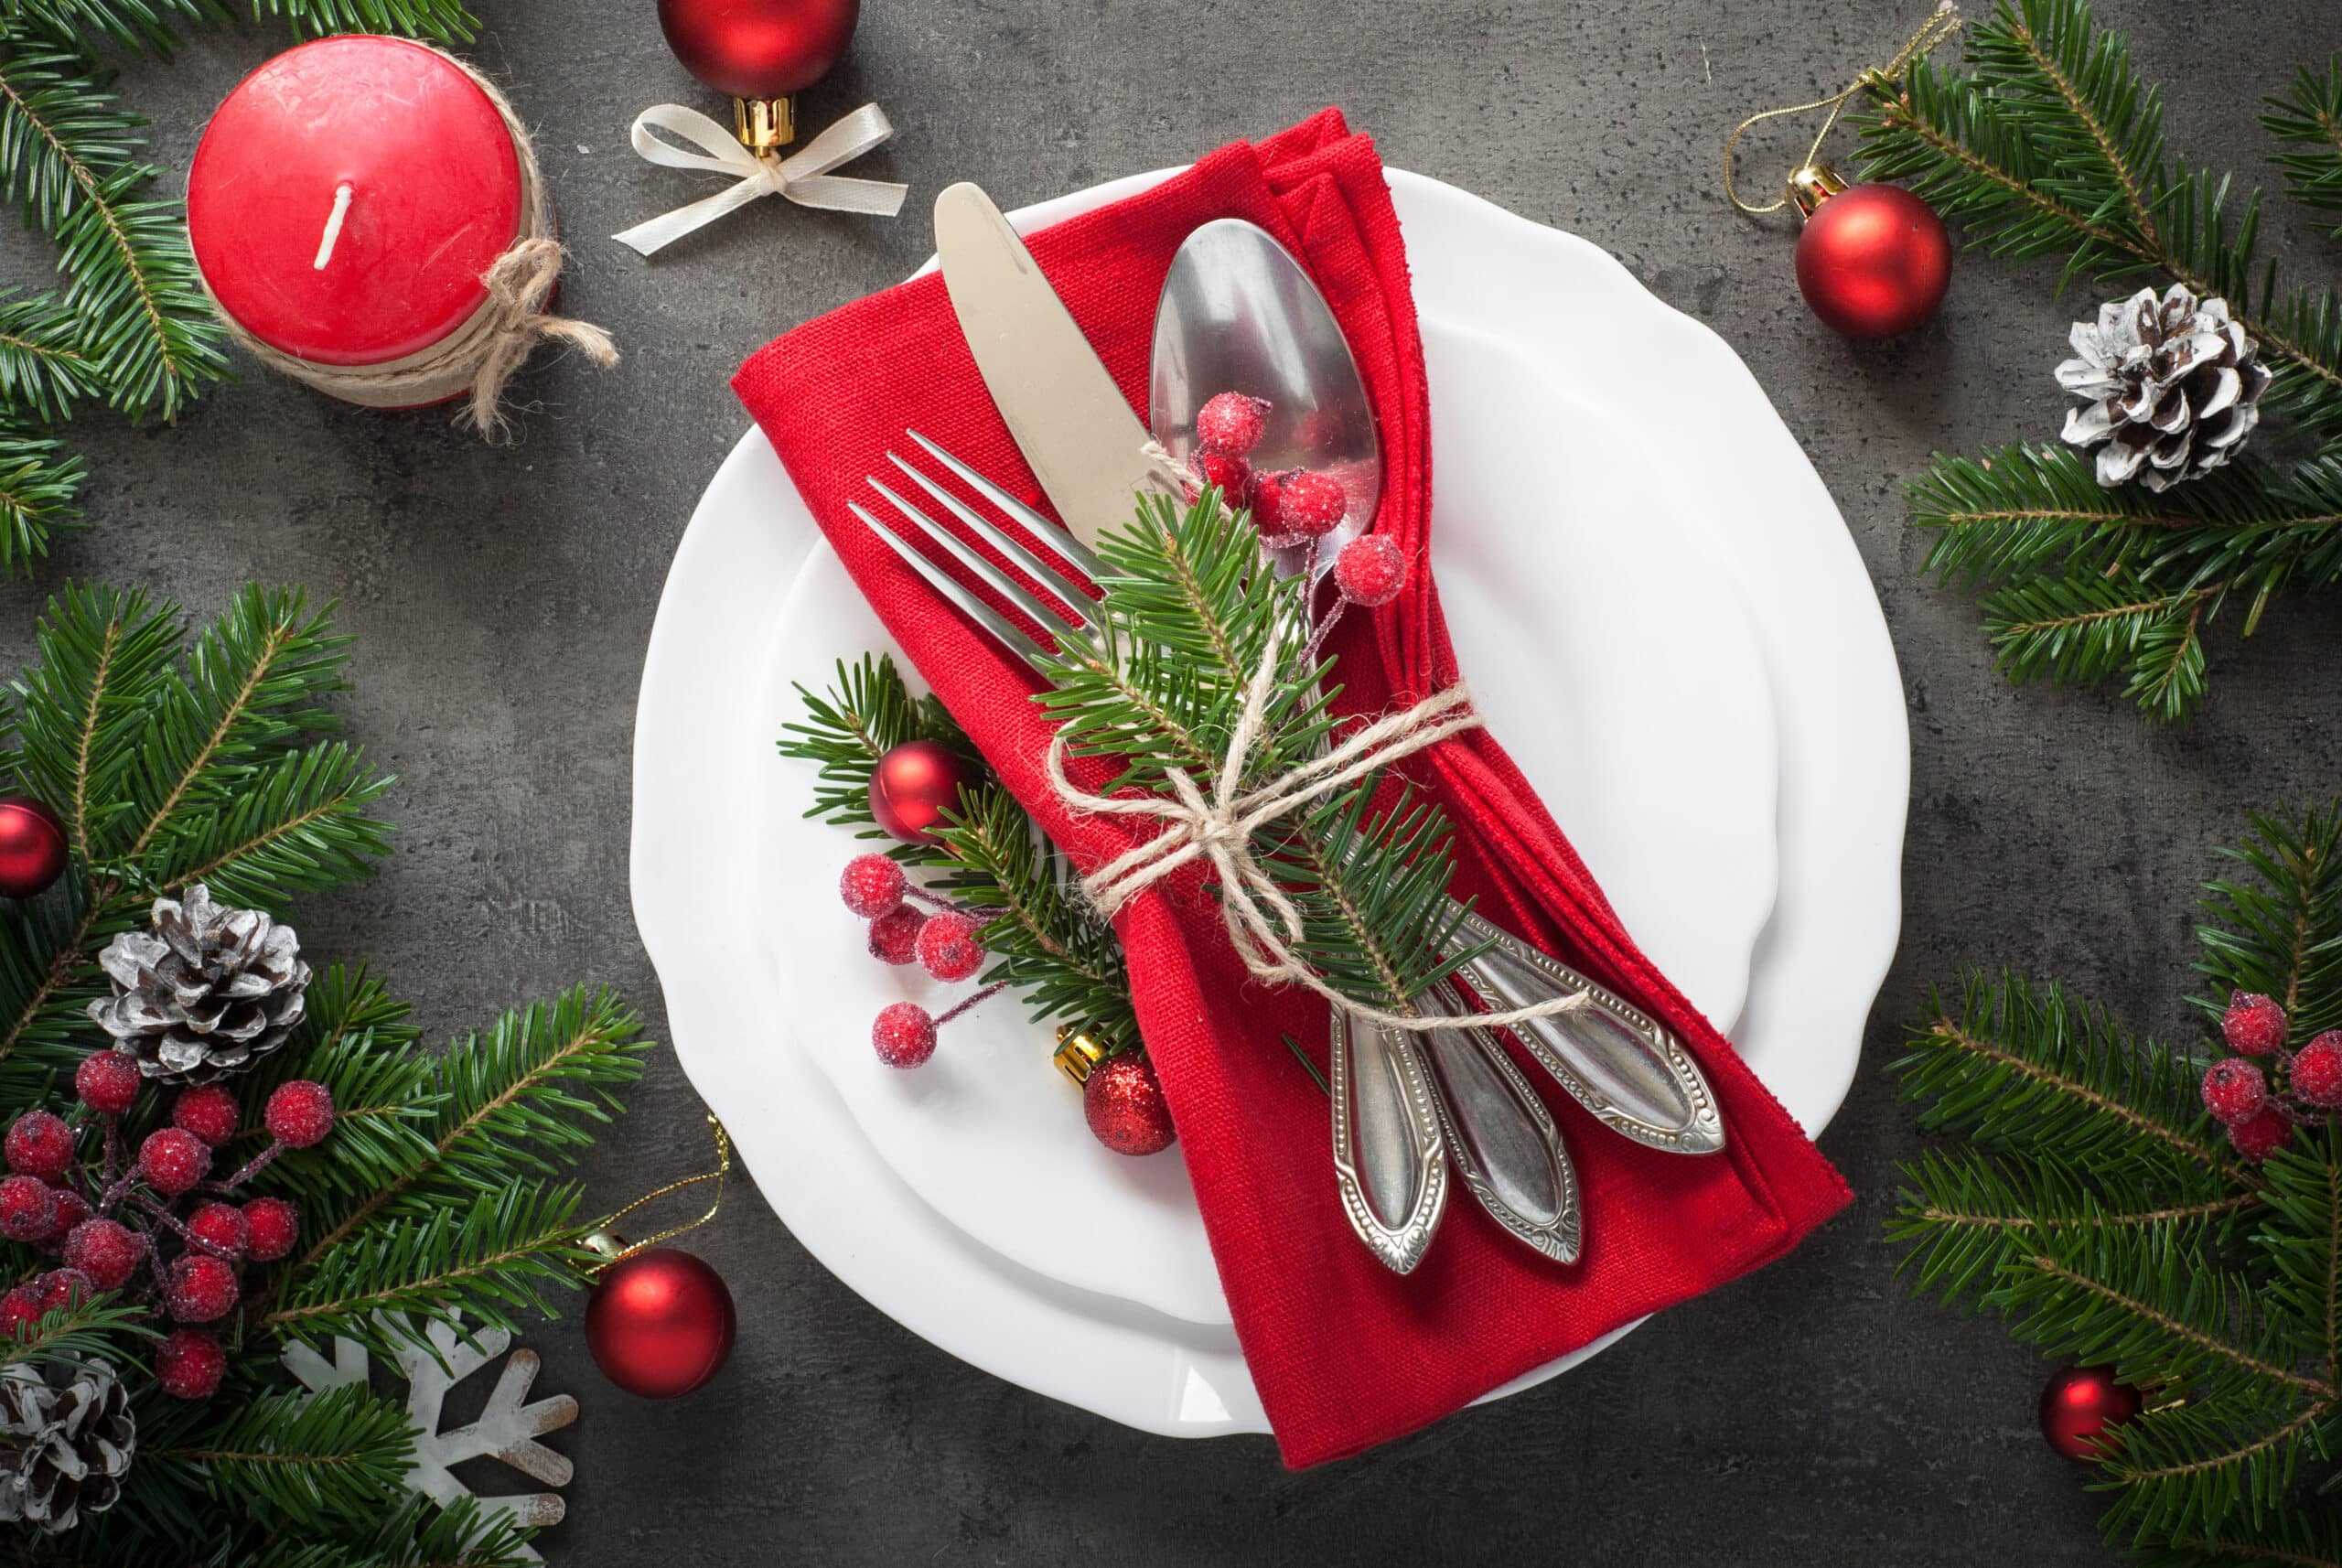 the-best-holiday-foods-for-your-dental-health-this-christmas